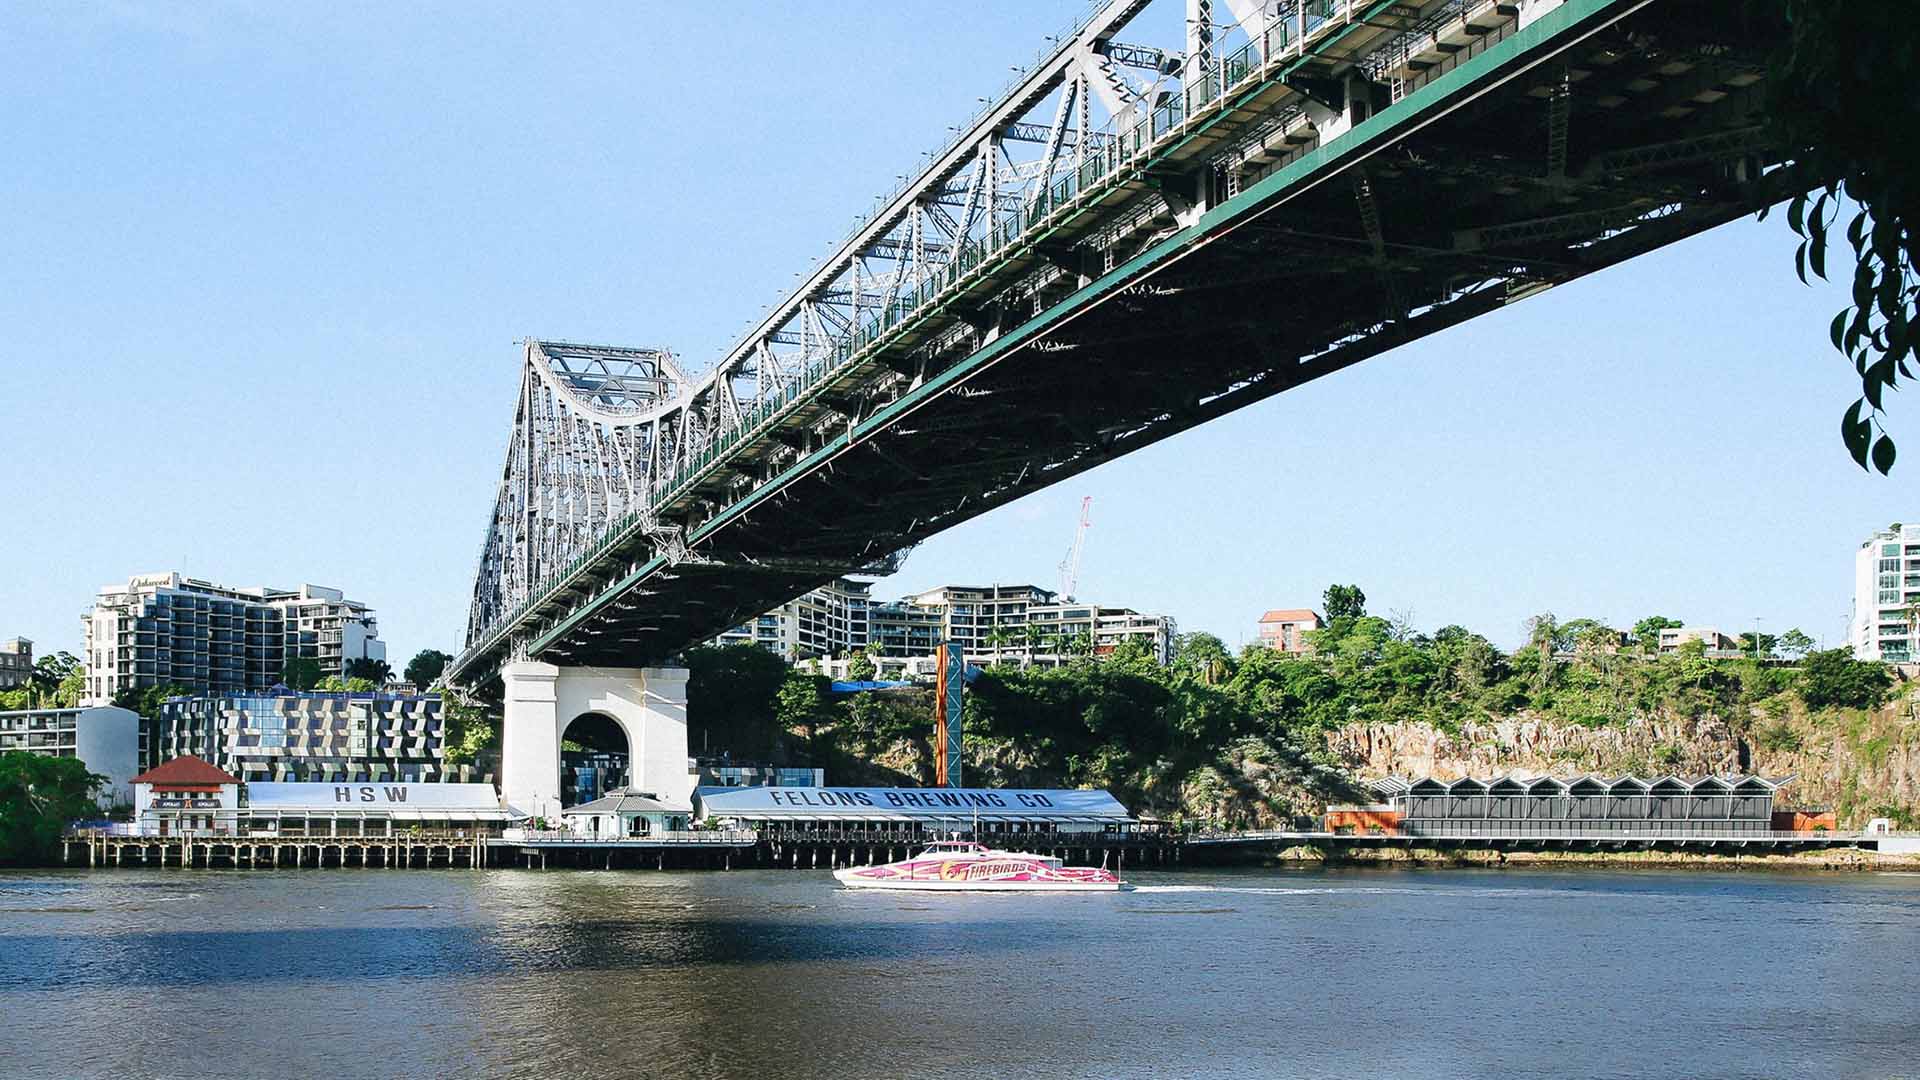 Howard Smith Wharves Has Opened Its First Pontoon and Will Start Welcoming in Boat Tours